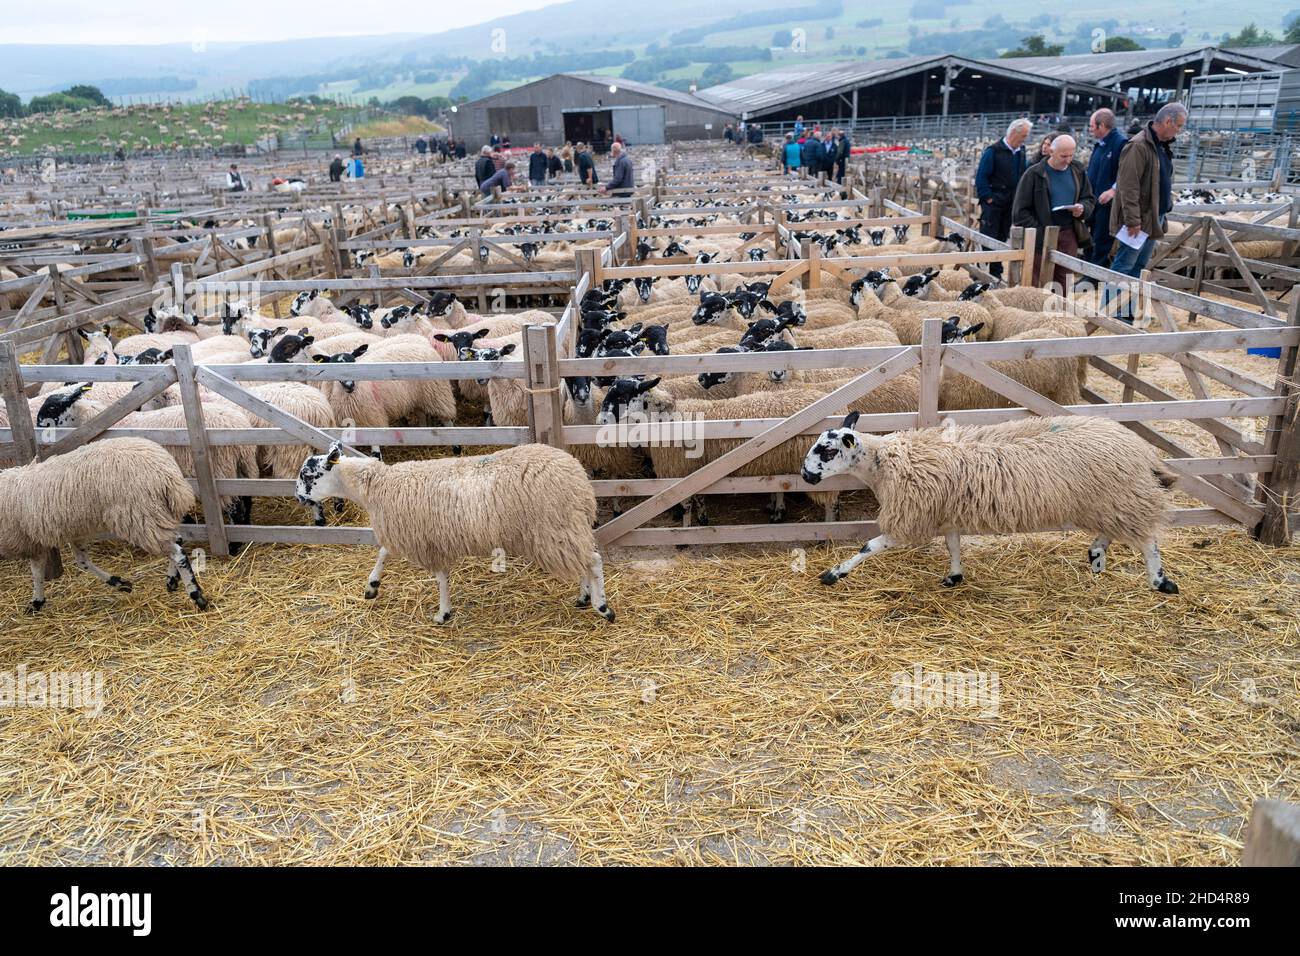 Sheep unloading of a livestock trailer at the Hawes mule gimmer lamb sale, September. North Yorkshire, UK. Stock Photo